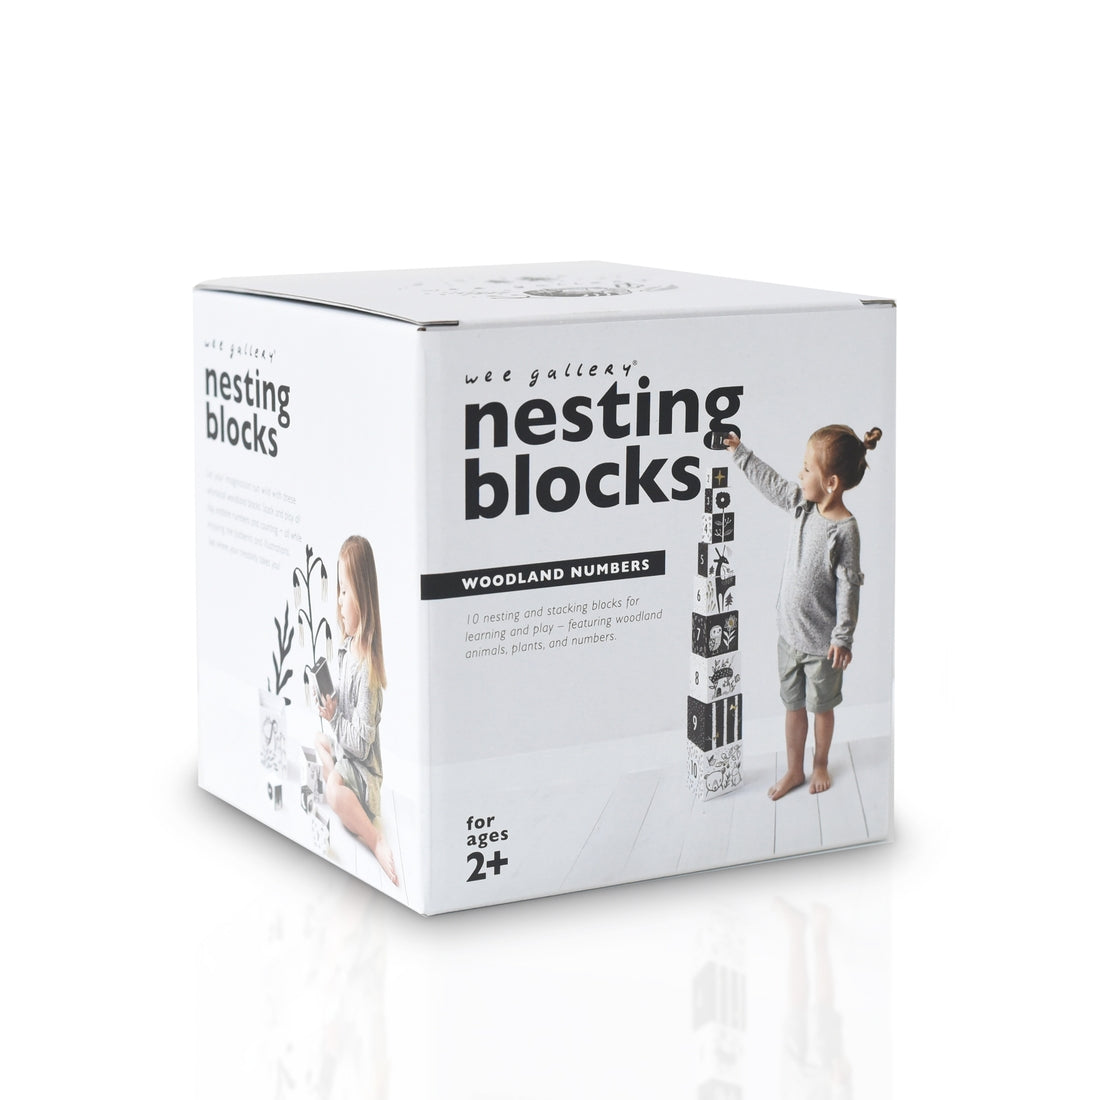 Wee Gallery woodland number nesting blocks against white backdrop